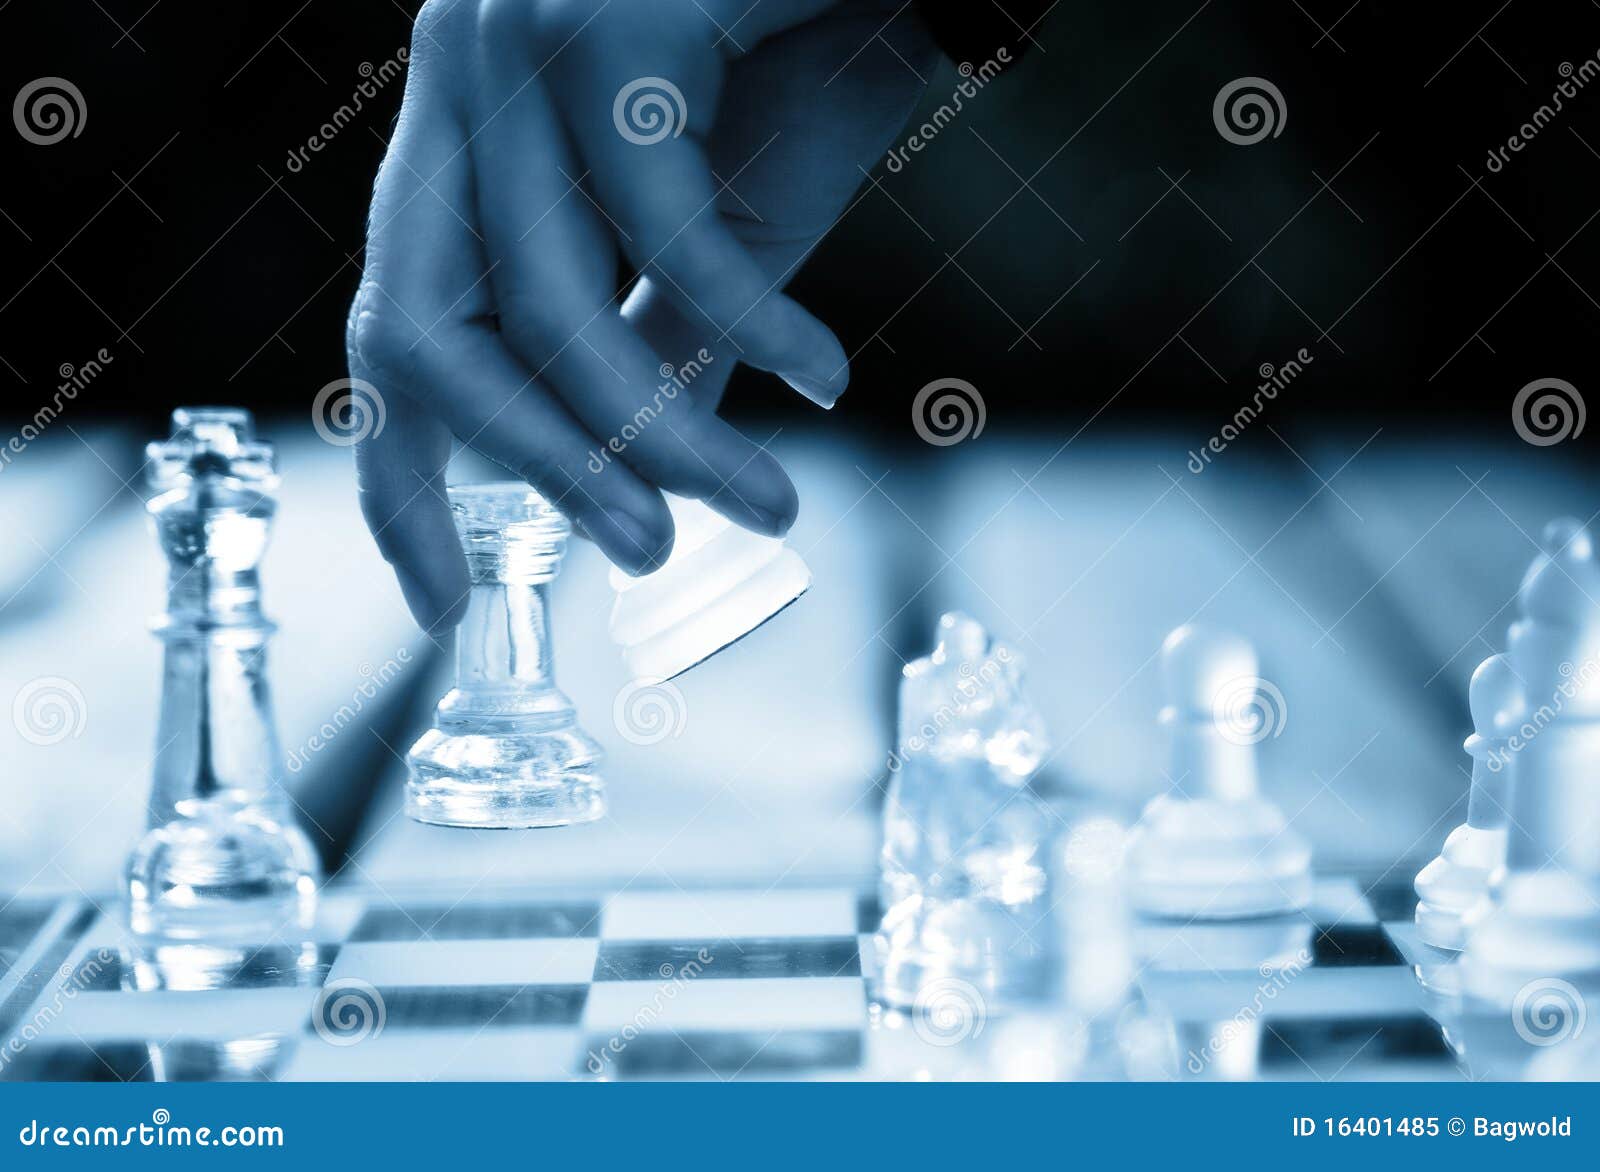 Senior Man Thinking about His Next Move in a Game of Chess Stock Photo -  Image of king, checkmate: 64993646